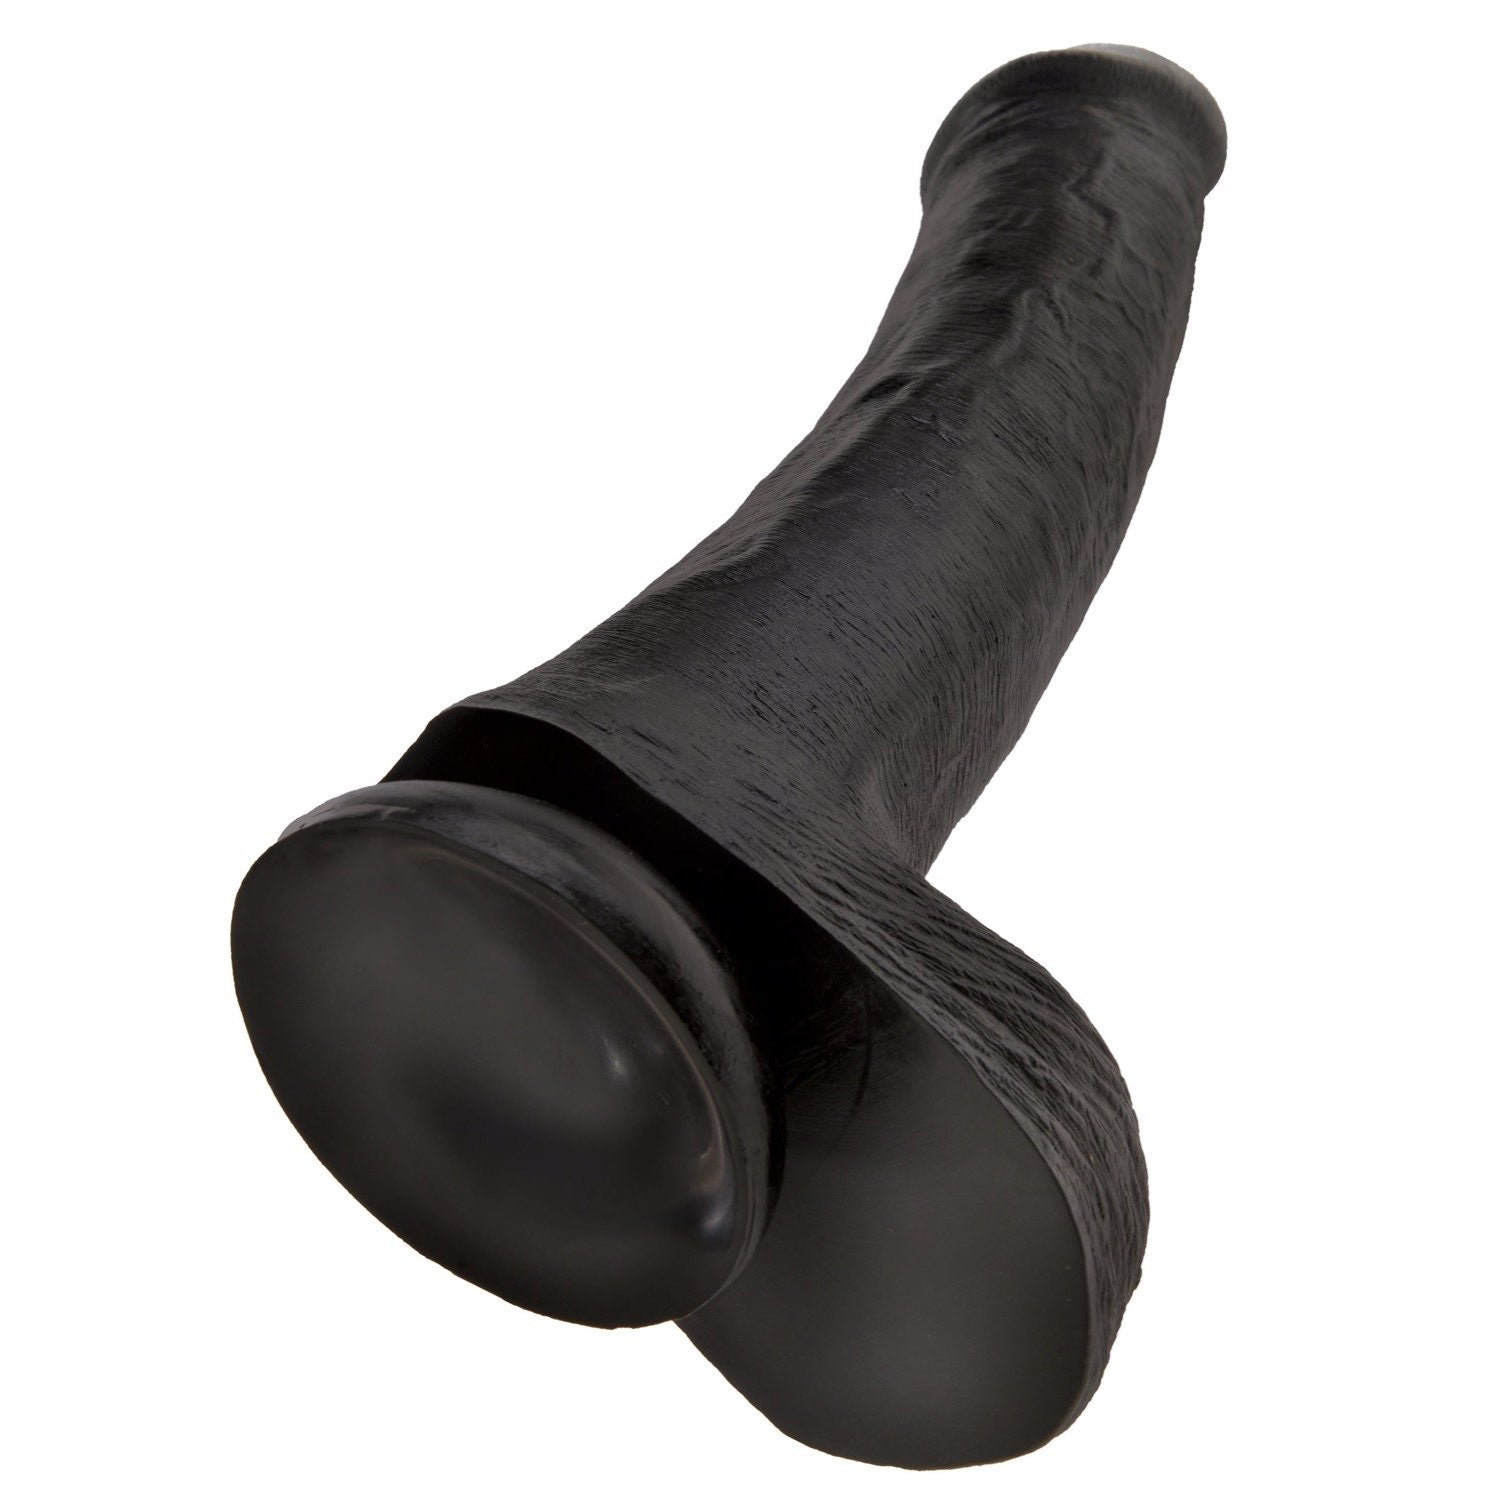 King Cock 13IN Cock with Balls - Black by Pipedream